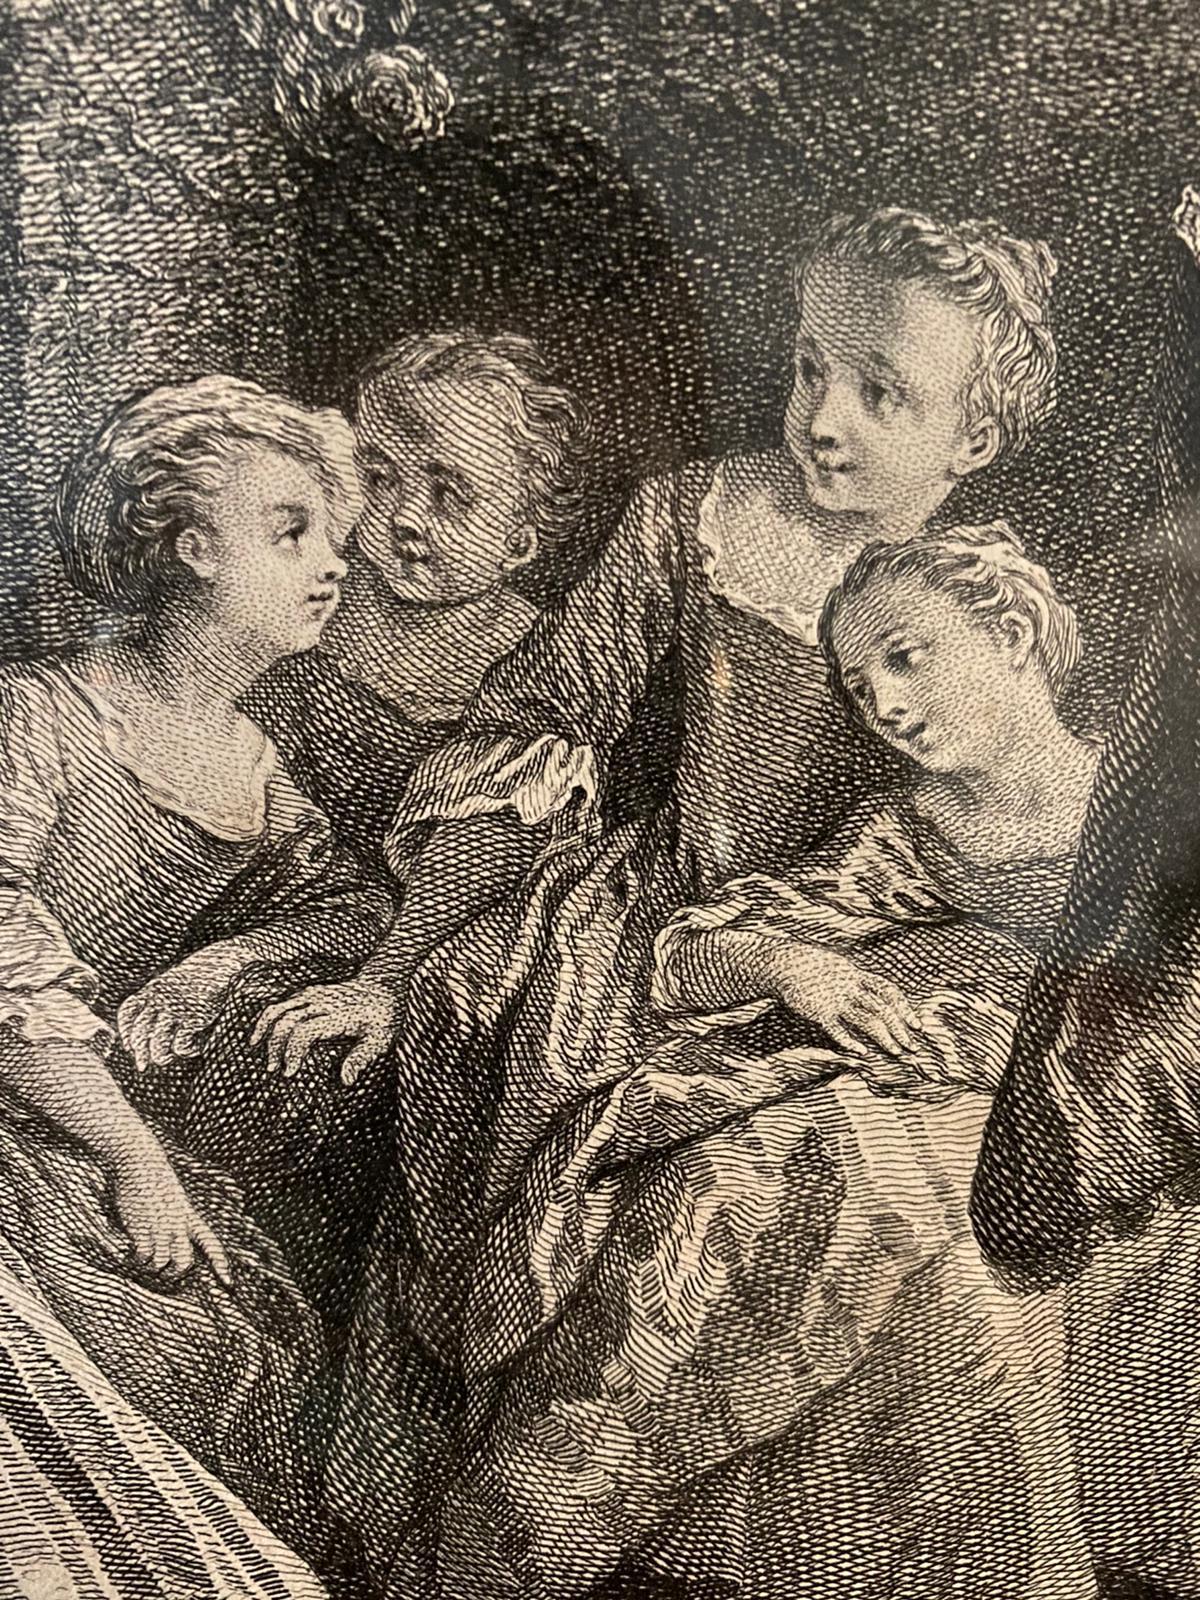 This wonderful engraving belongs to a set of three engravings representing children's games. This series dates from the 18th century. It consists of the game of hide and seek, the game of the four corners and the game of the ox leg. 

The scene